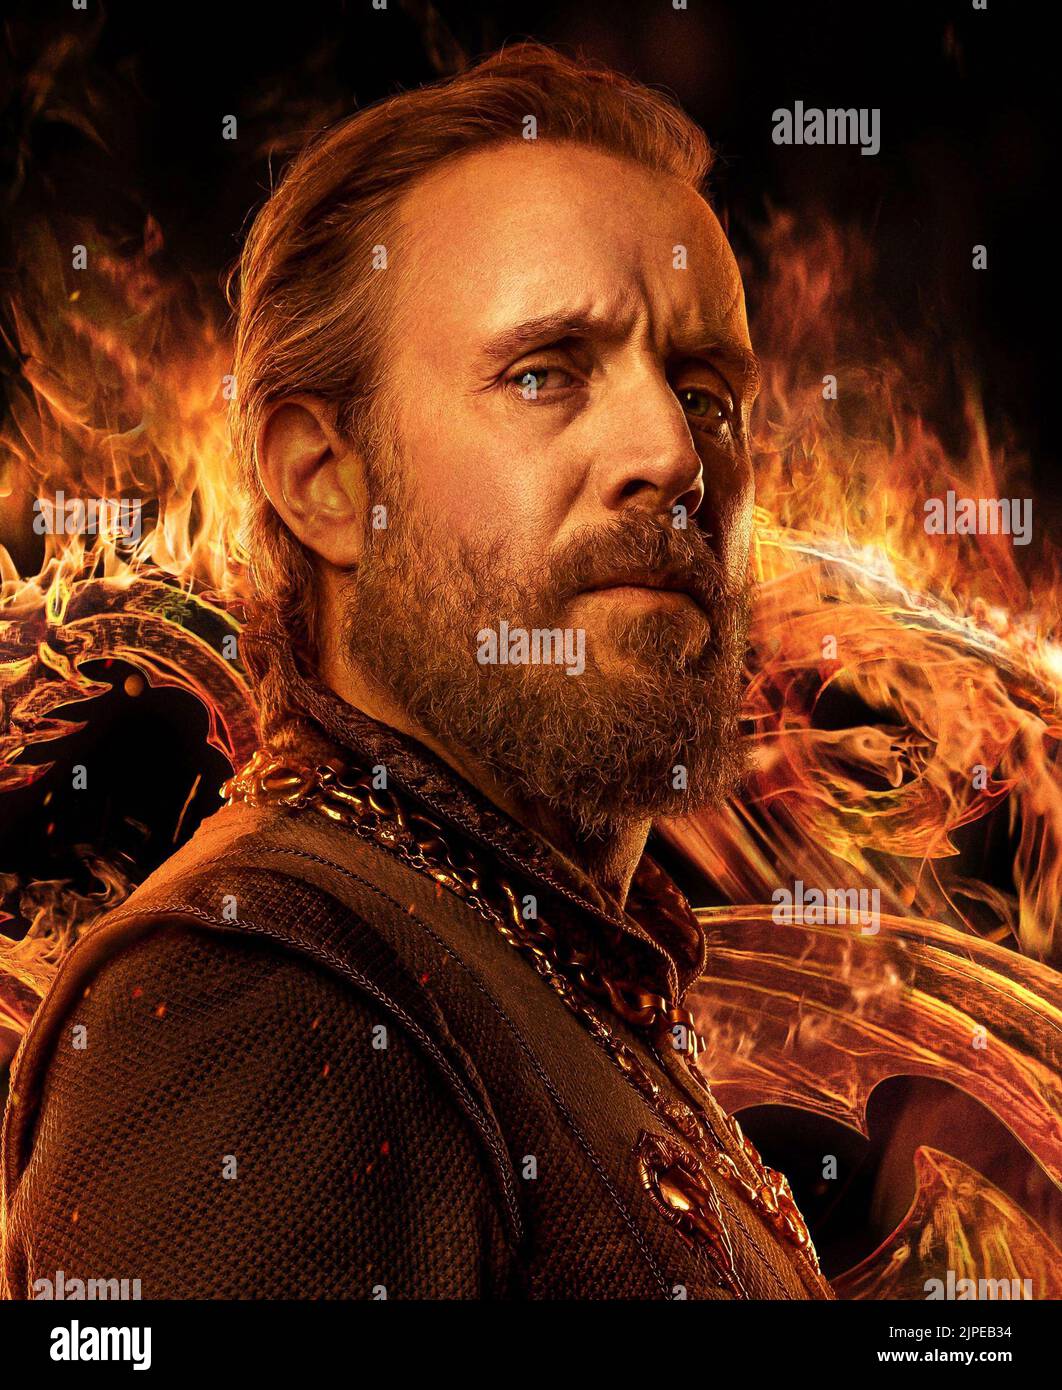 USA. Rhys Ifans in the (C)HBO new series: House of the Dragon (2022).  Plot: The story of the House Targaryen set 300 years before the events of Game of Thrones (2011).  Ref: LMK106-J8255-150822 Supplied by LMKMEDIA. Editorial Only. Landmark Media is not the copyright owner of these Film or TV stills but provides a service only for recognised Media outlets. pictures@lmkmedia.com Stock Photo